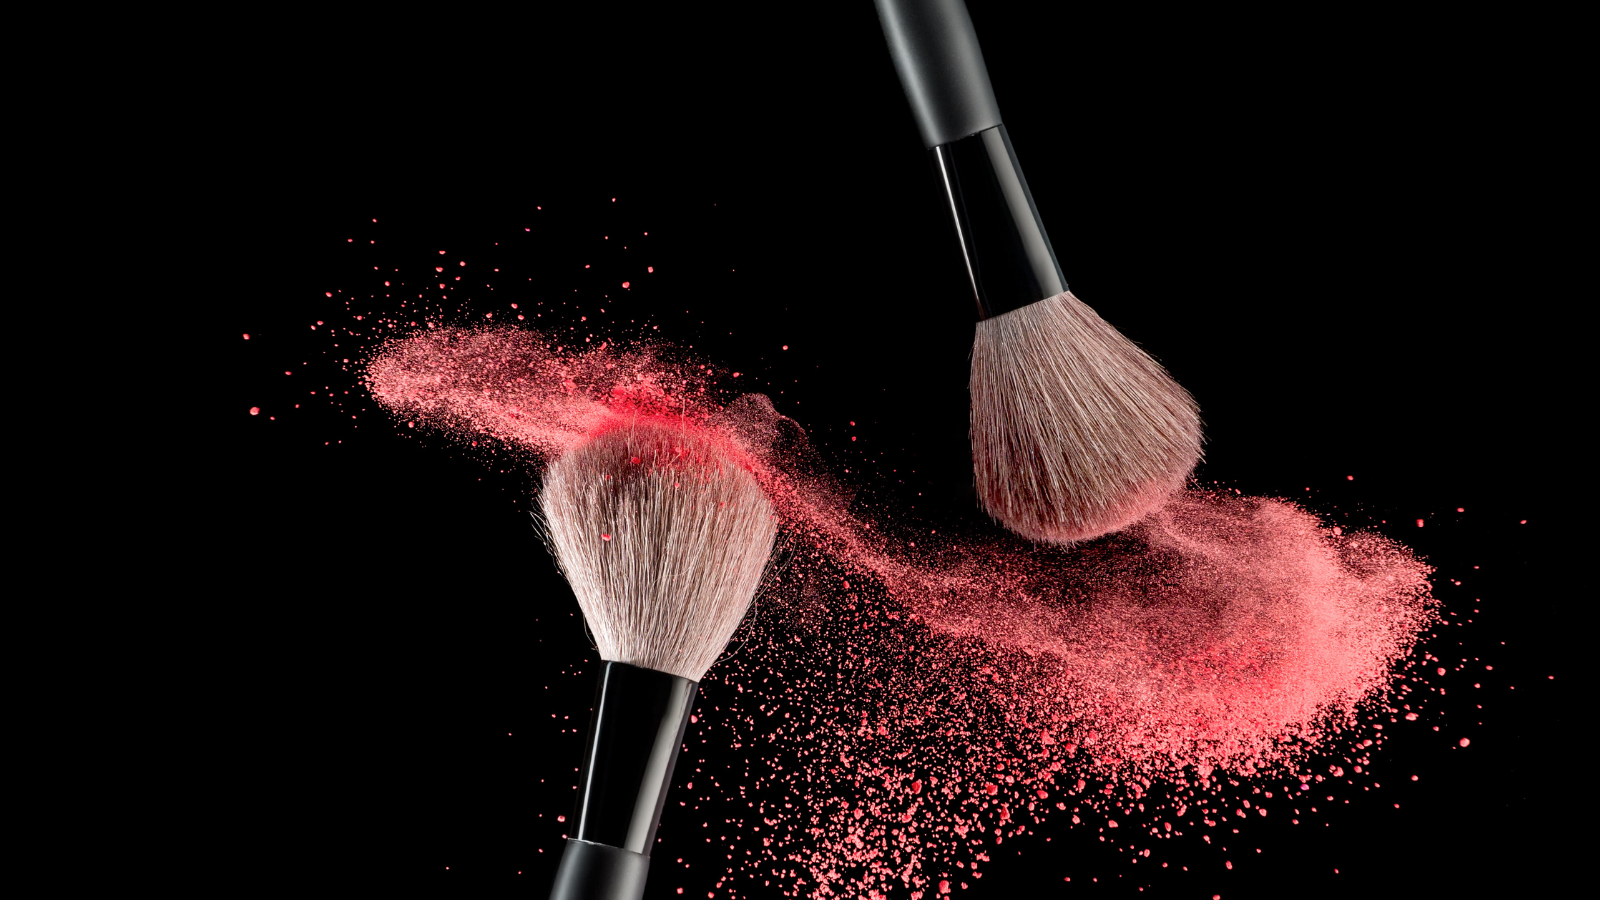 Pink Cosmetic Blushon Powder from Brushes